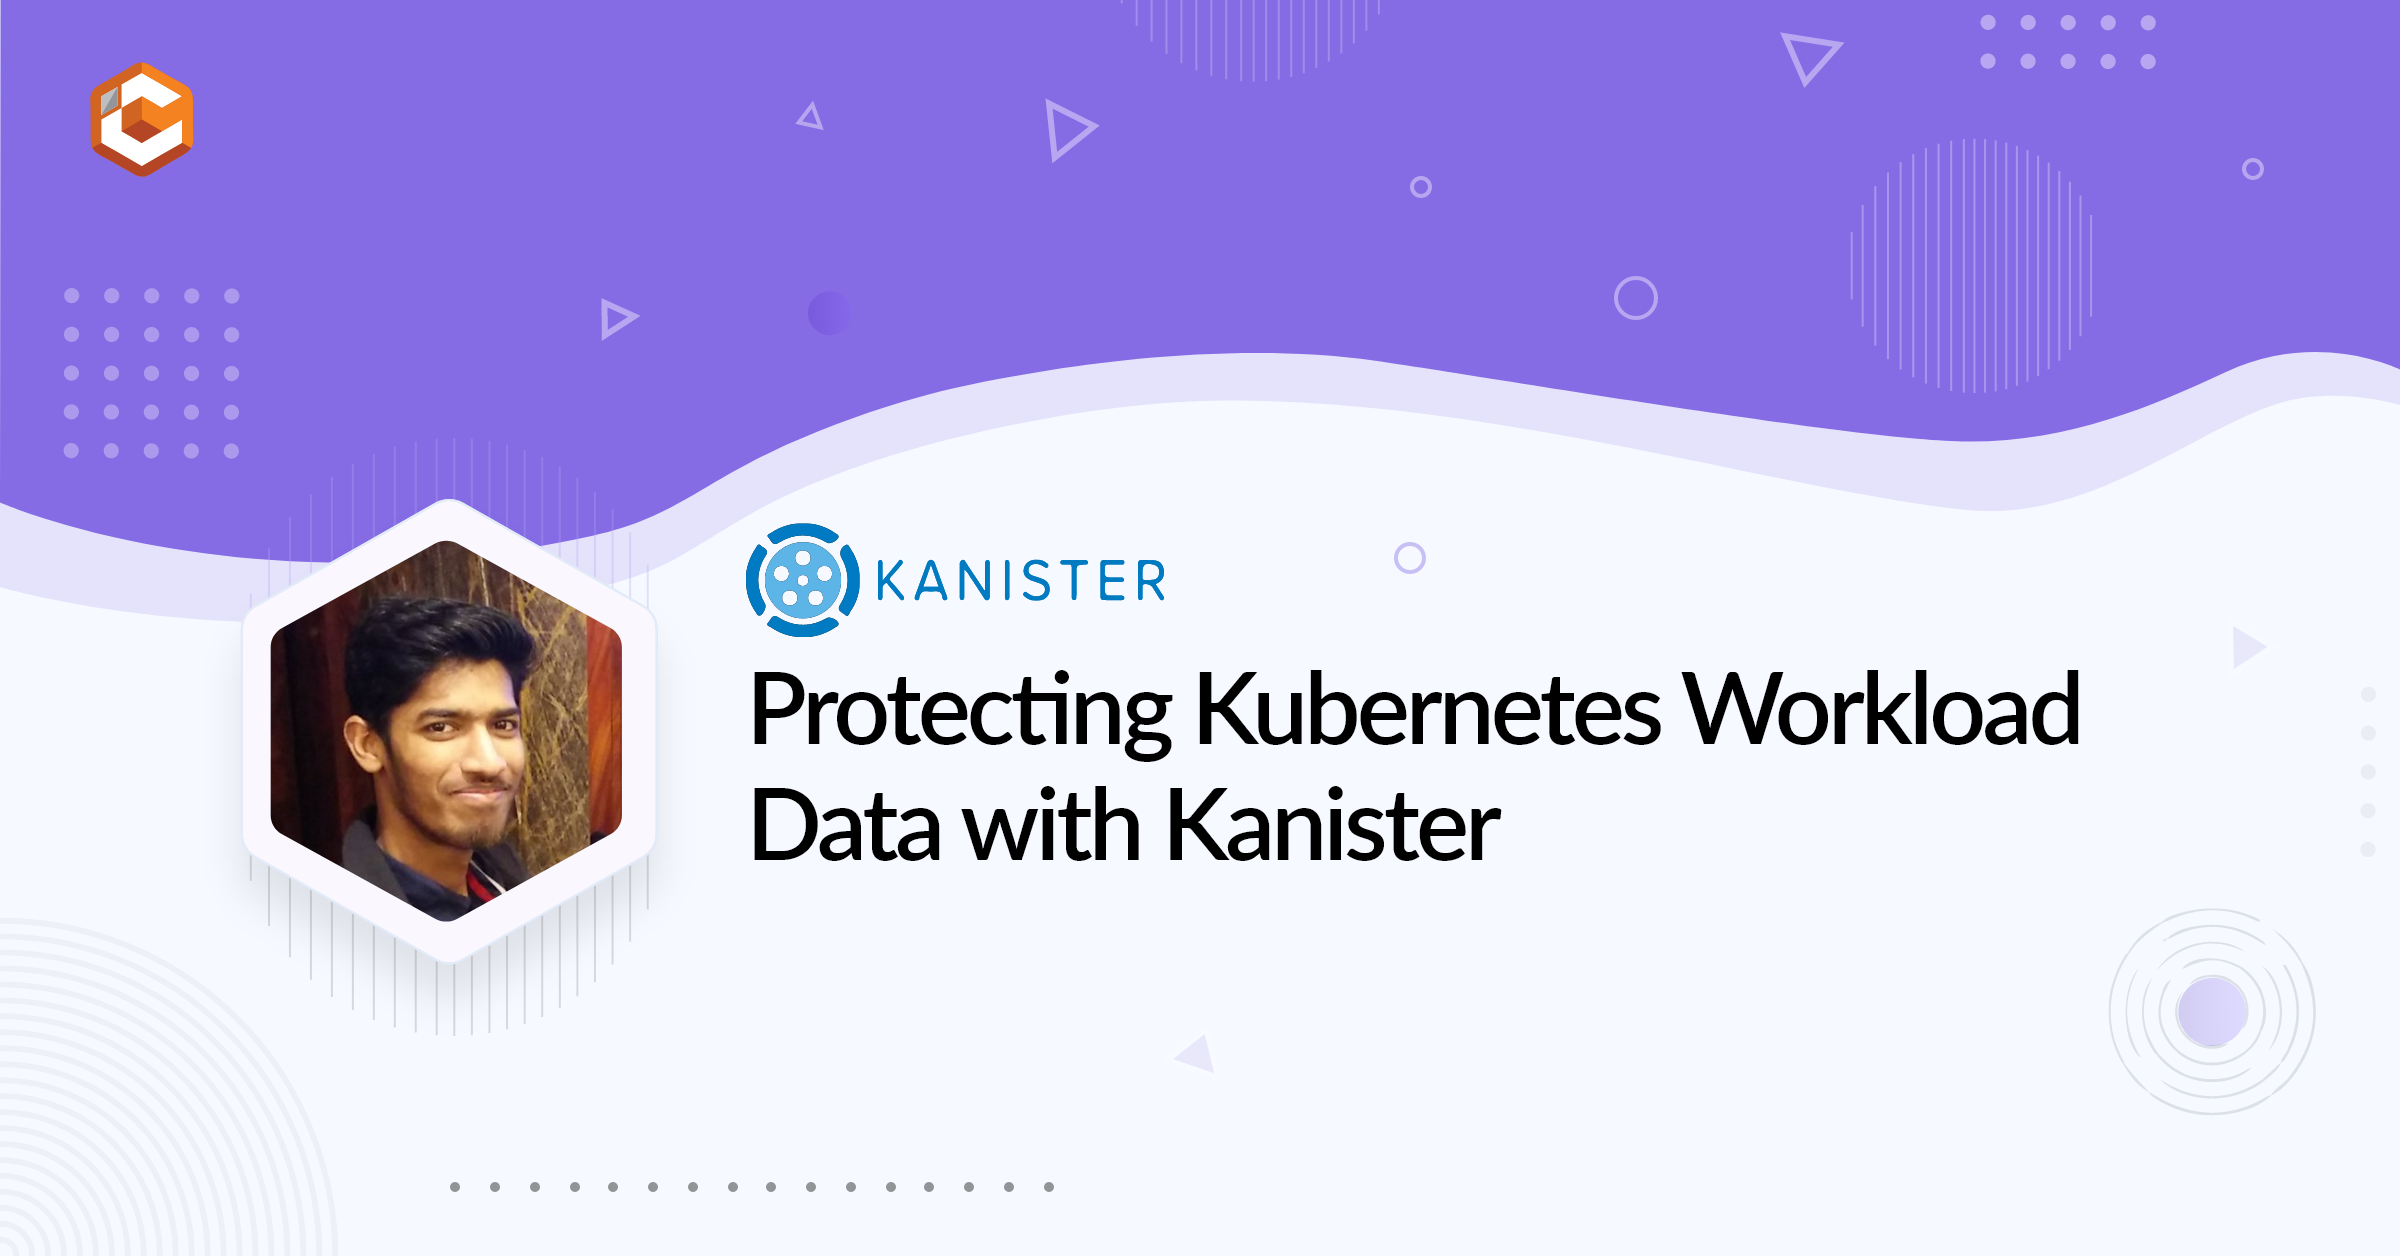 Protecting Kubernetes Workload Data with Kanister